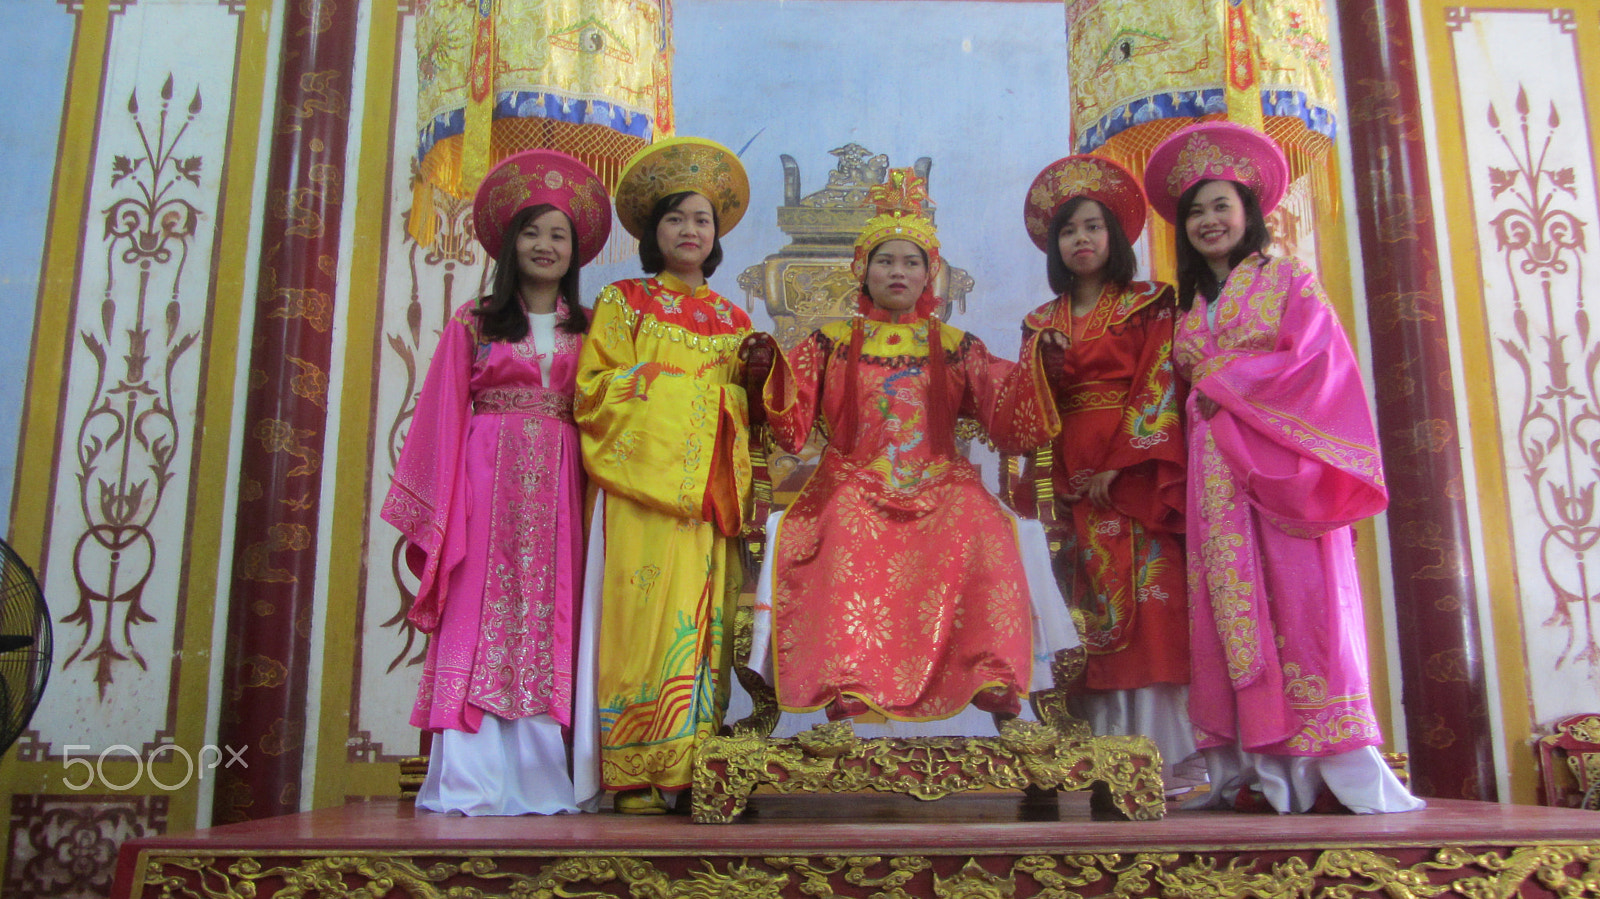 Canon PowerShot SX220 HS sample photo. Role playing in hue royal court photography